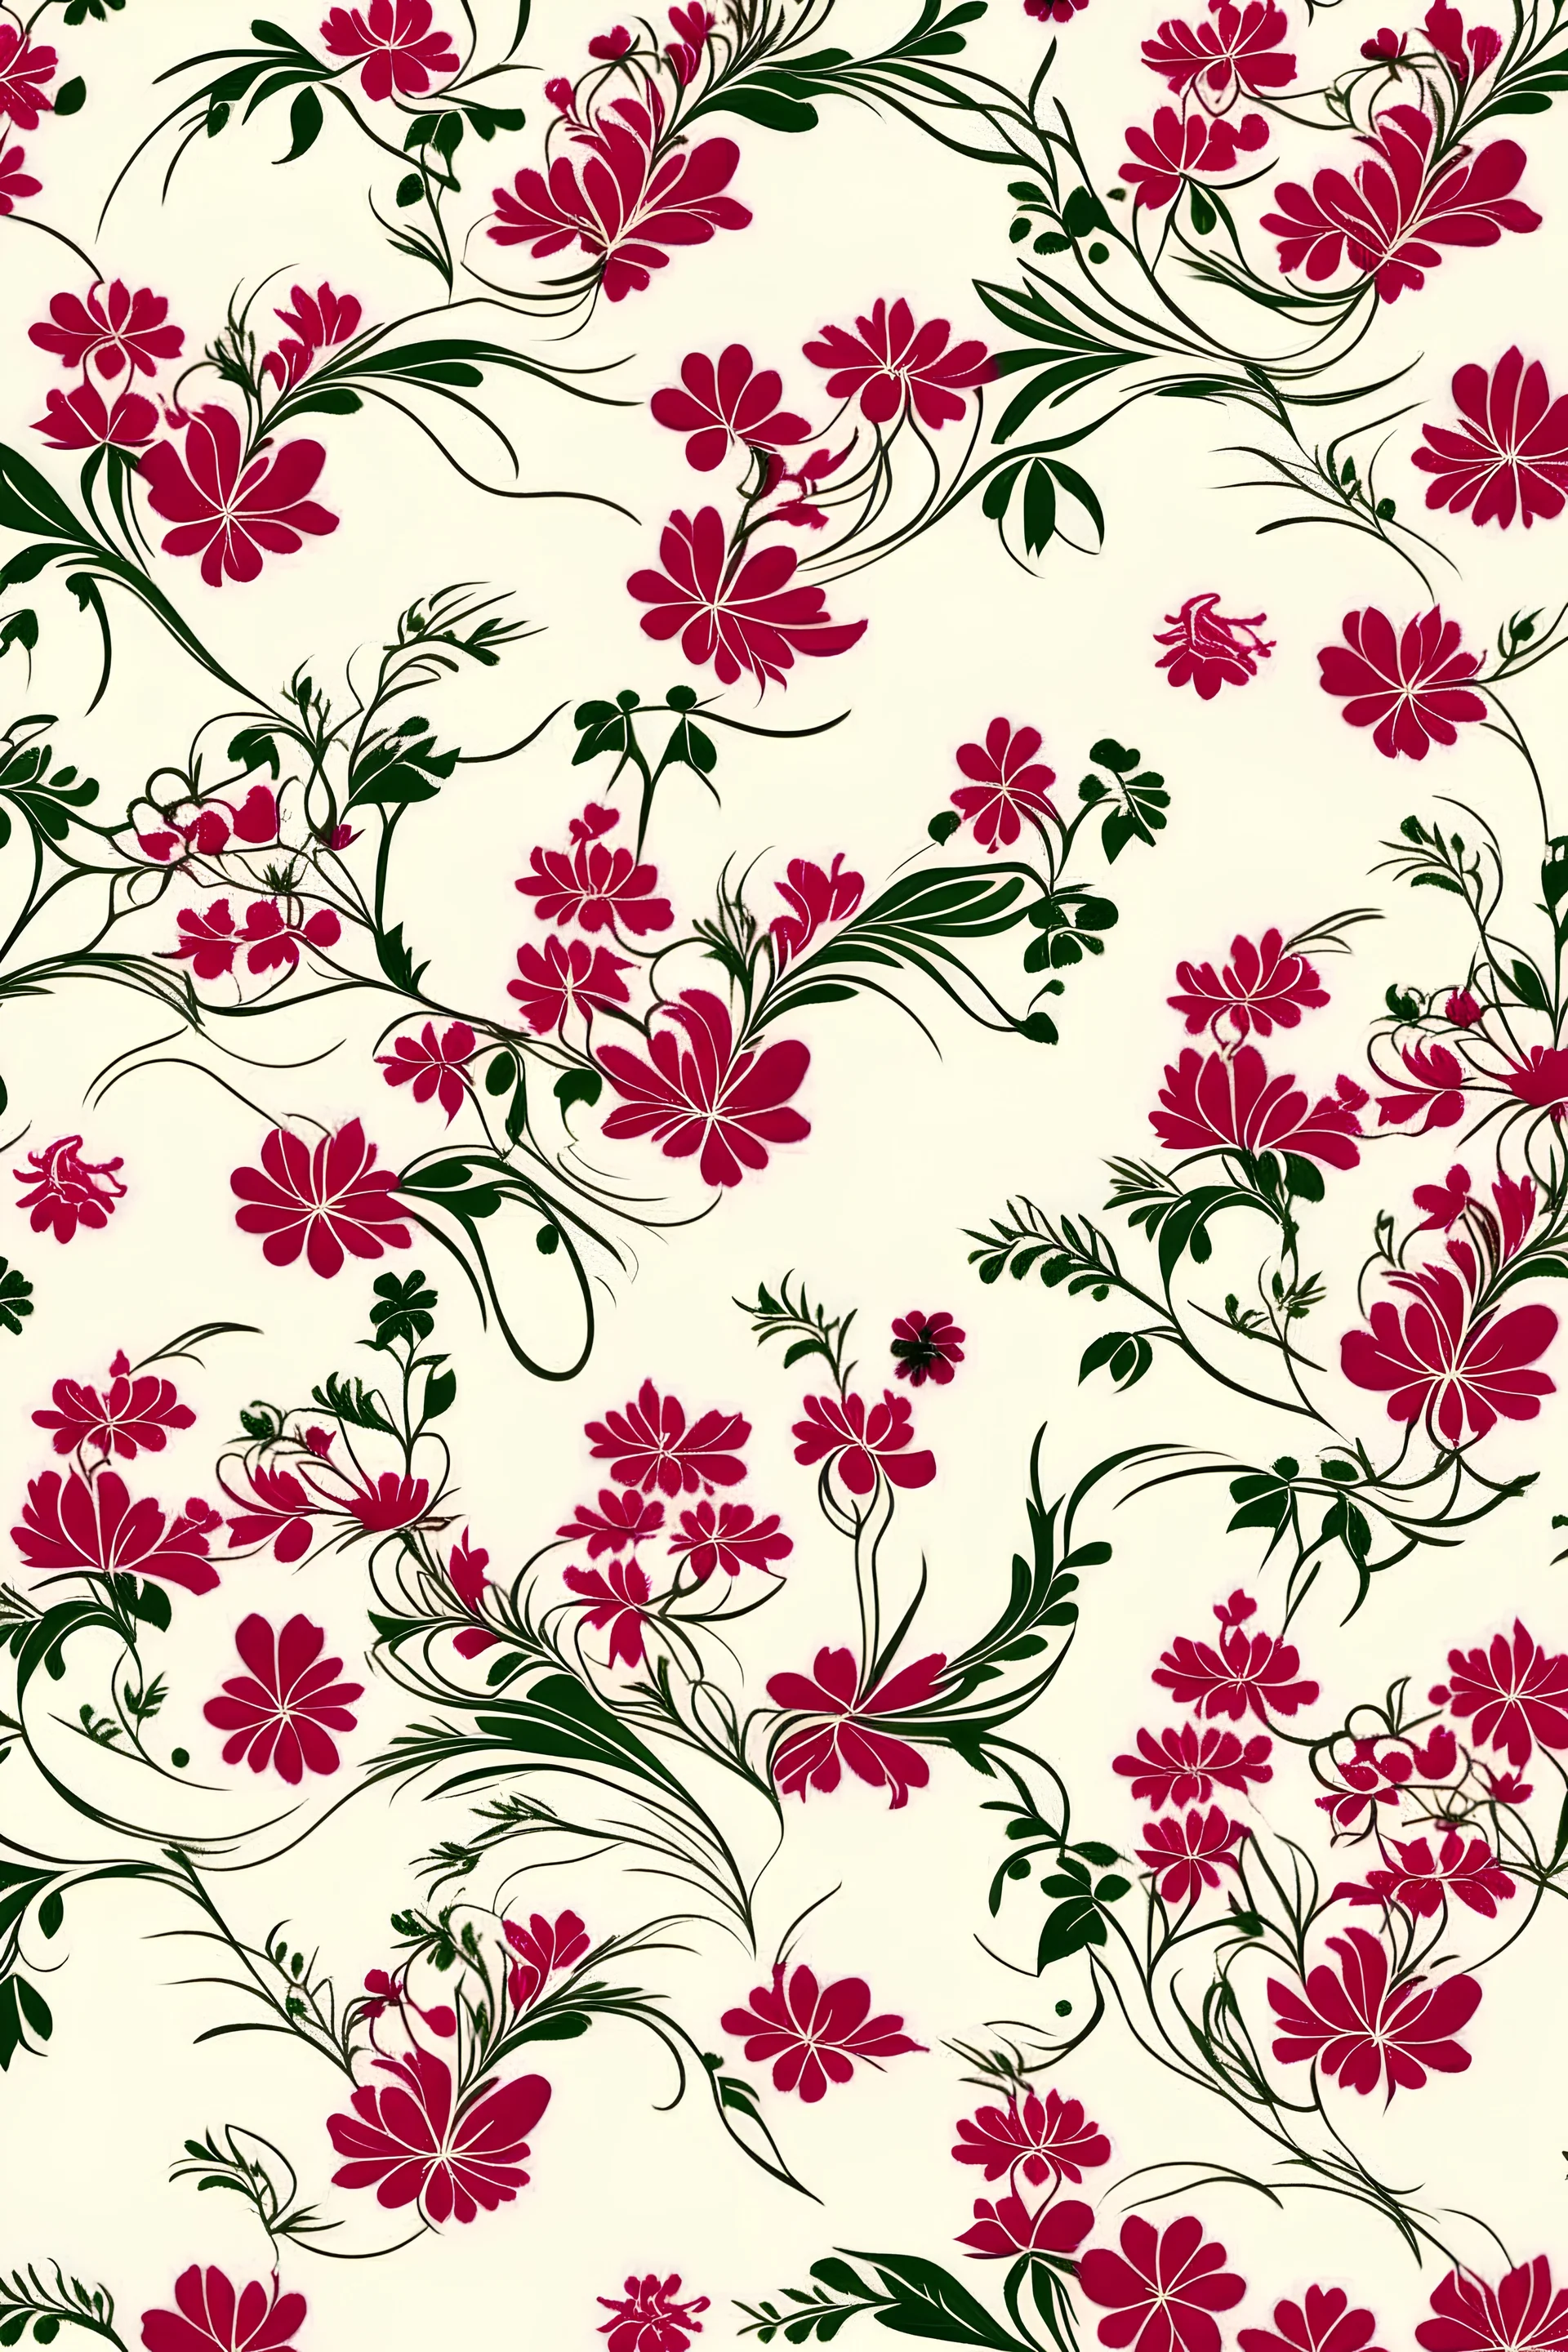 tilable cotton fabric pattern